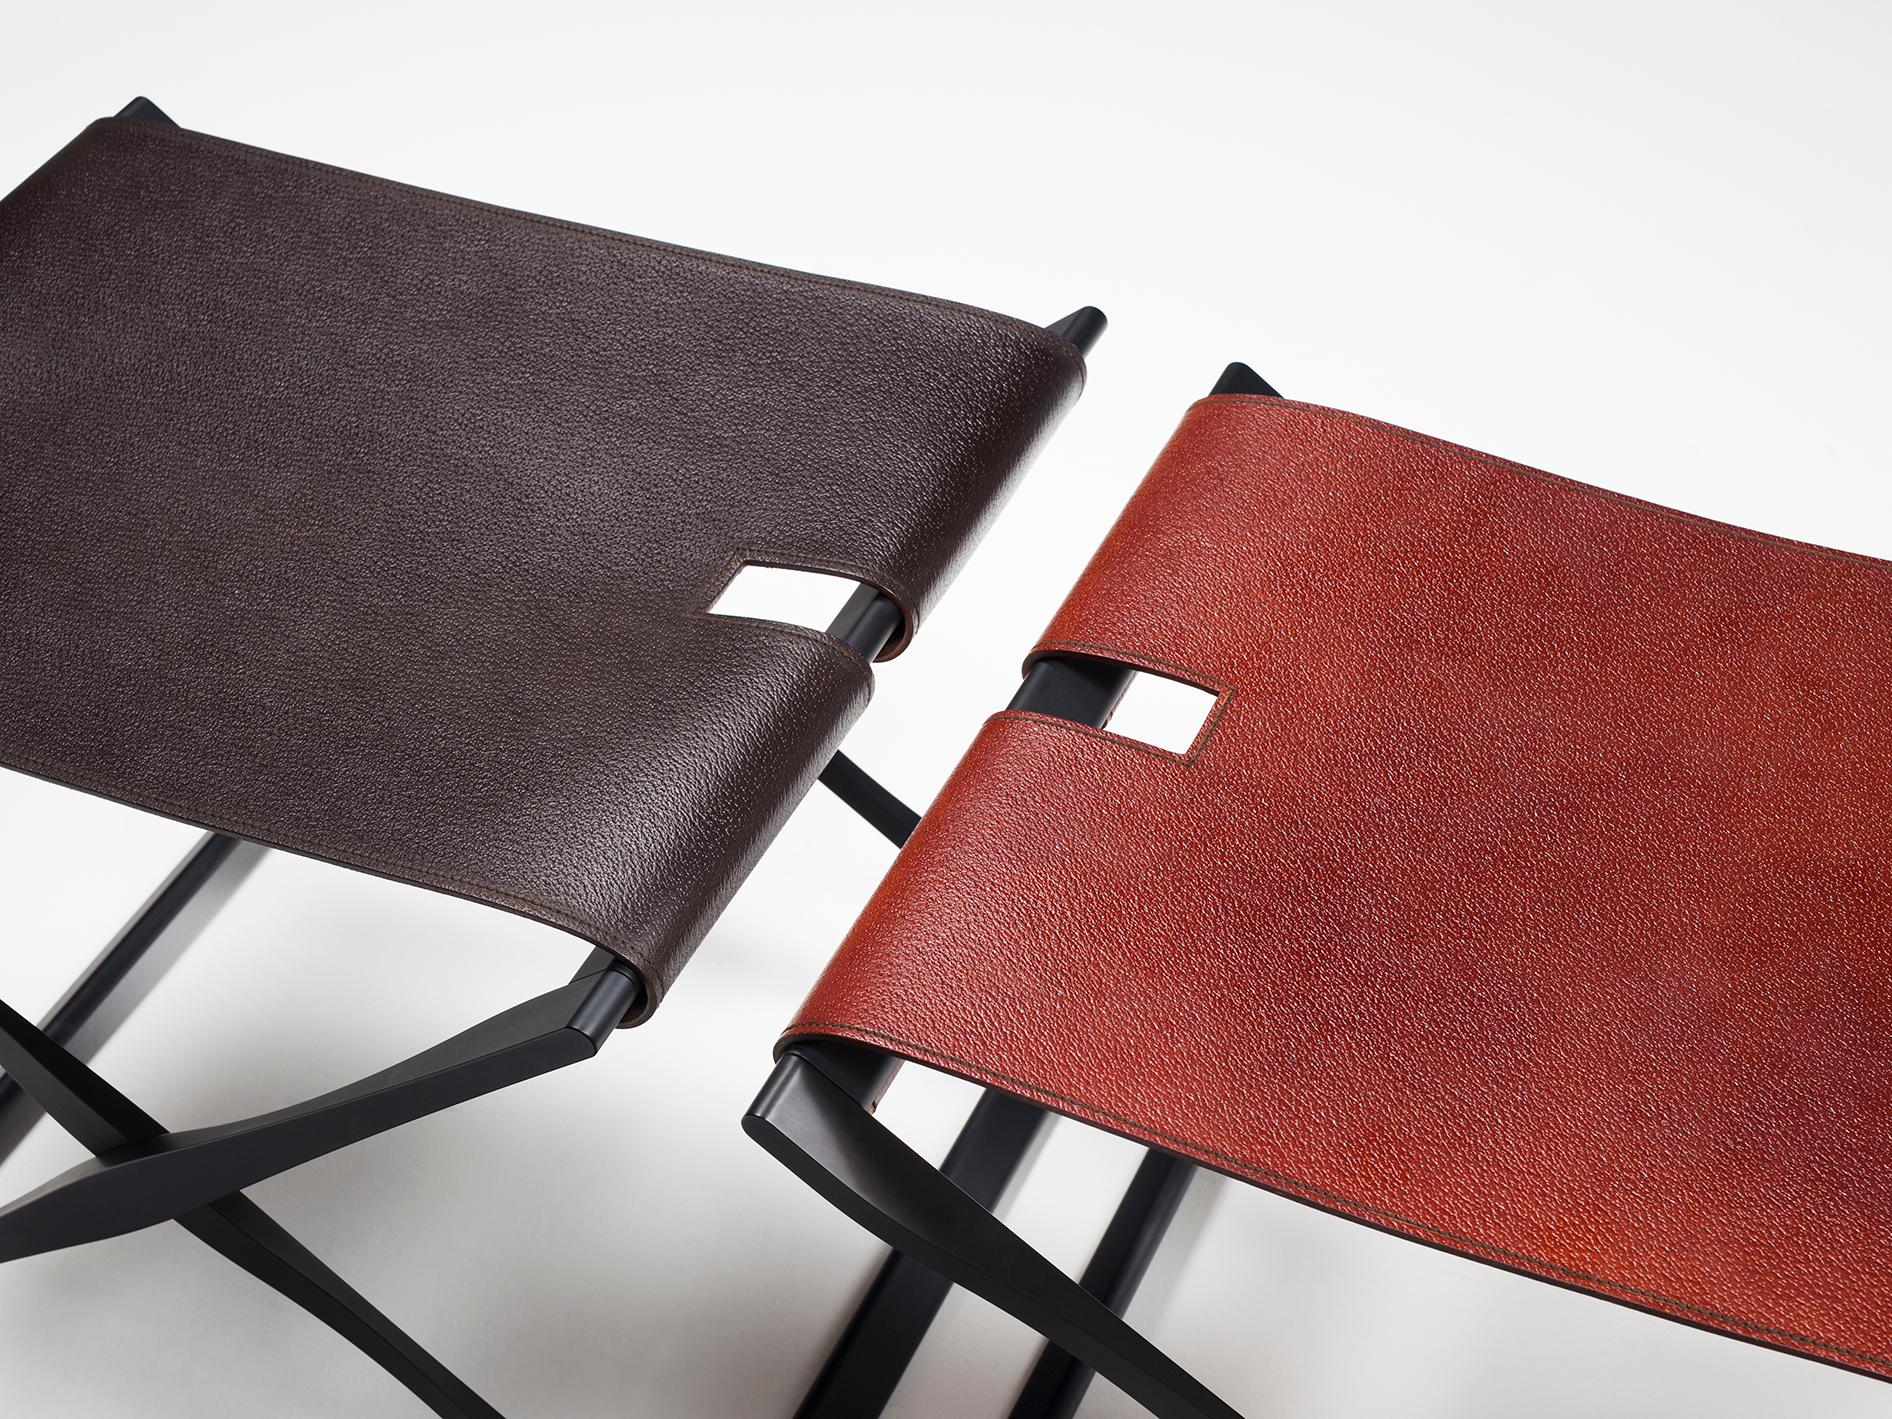 HOLLY HUNT Rover folding stool in anodized aluminium and cordovan rover leather. A luxurious folding stool with a base that is crafted from precision milled, solid aluminum and a seat made of Corodovon Leather.


Additional Information:
Stool Base: